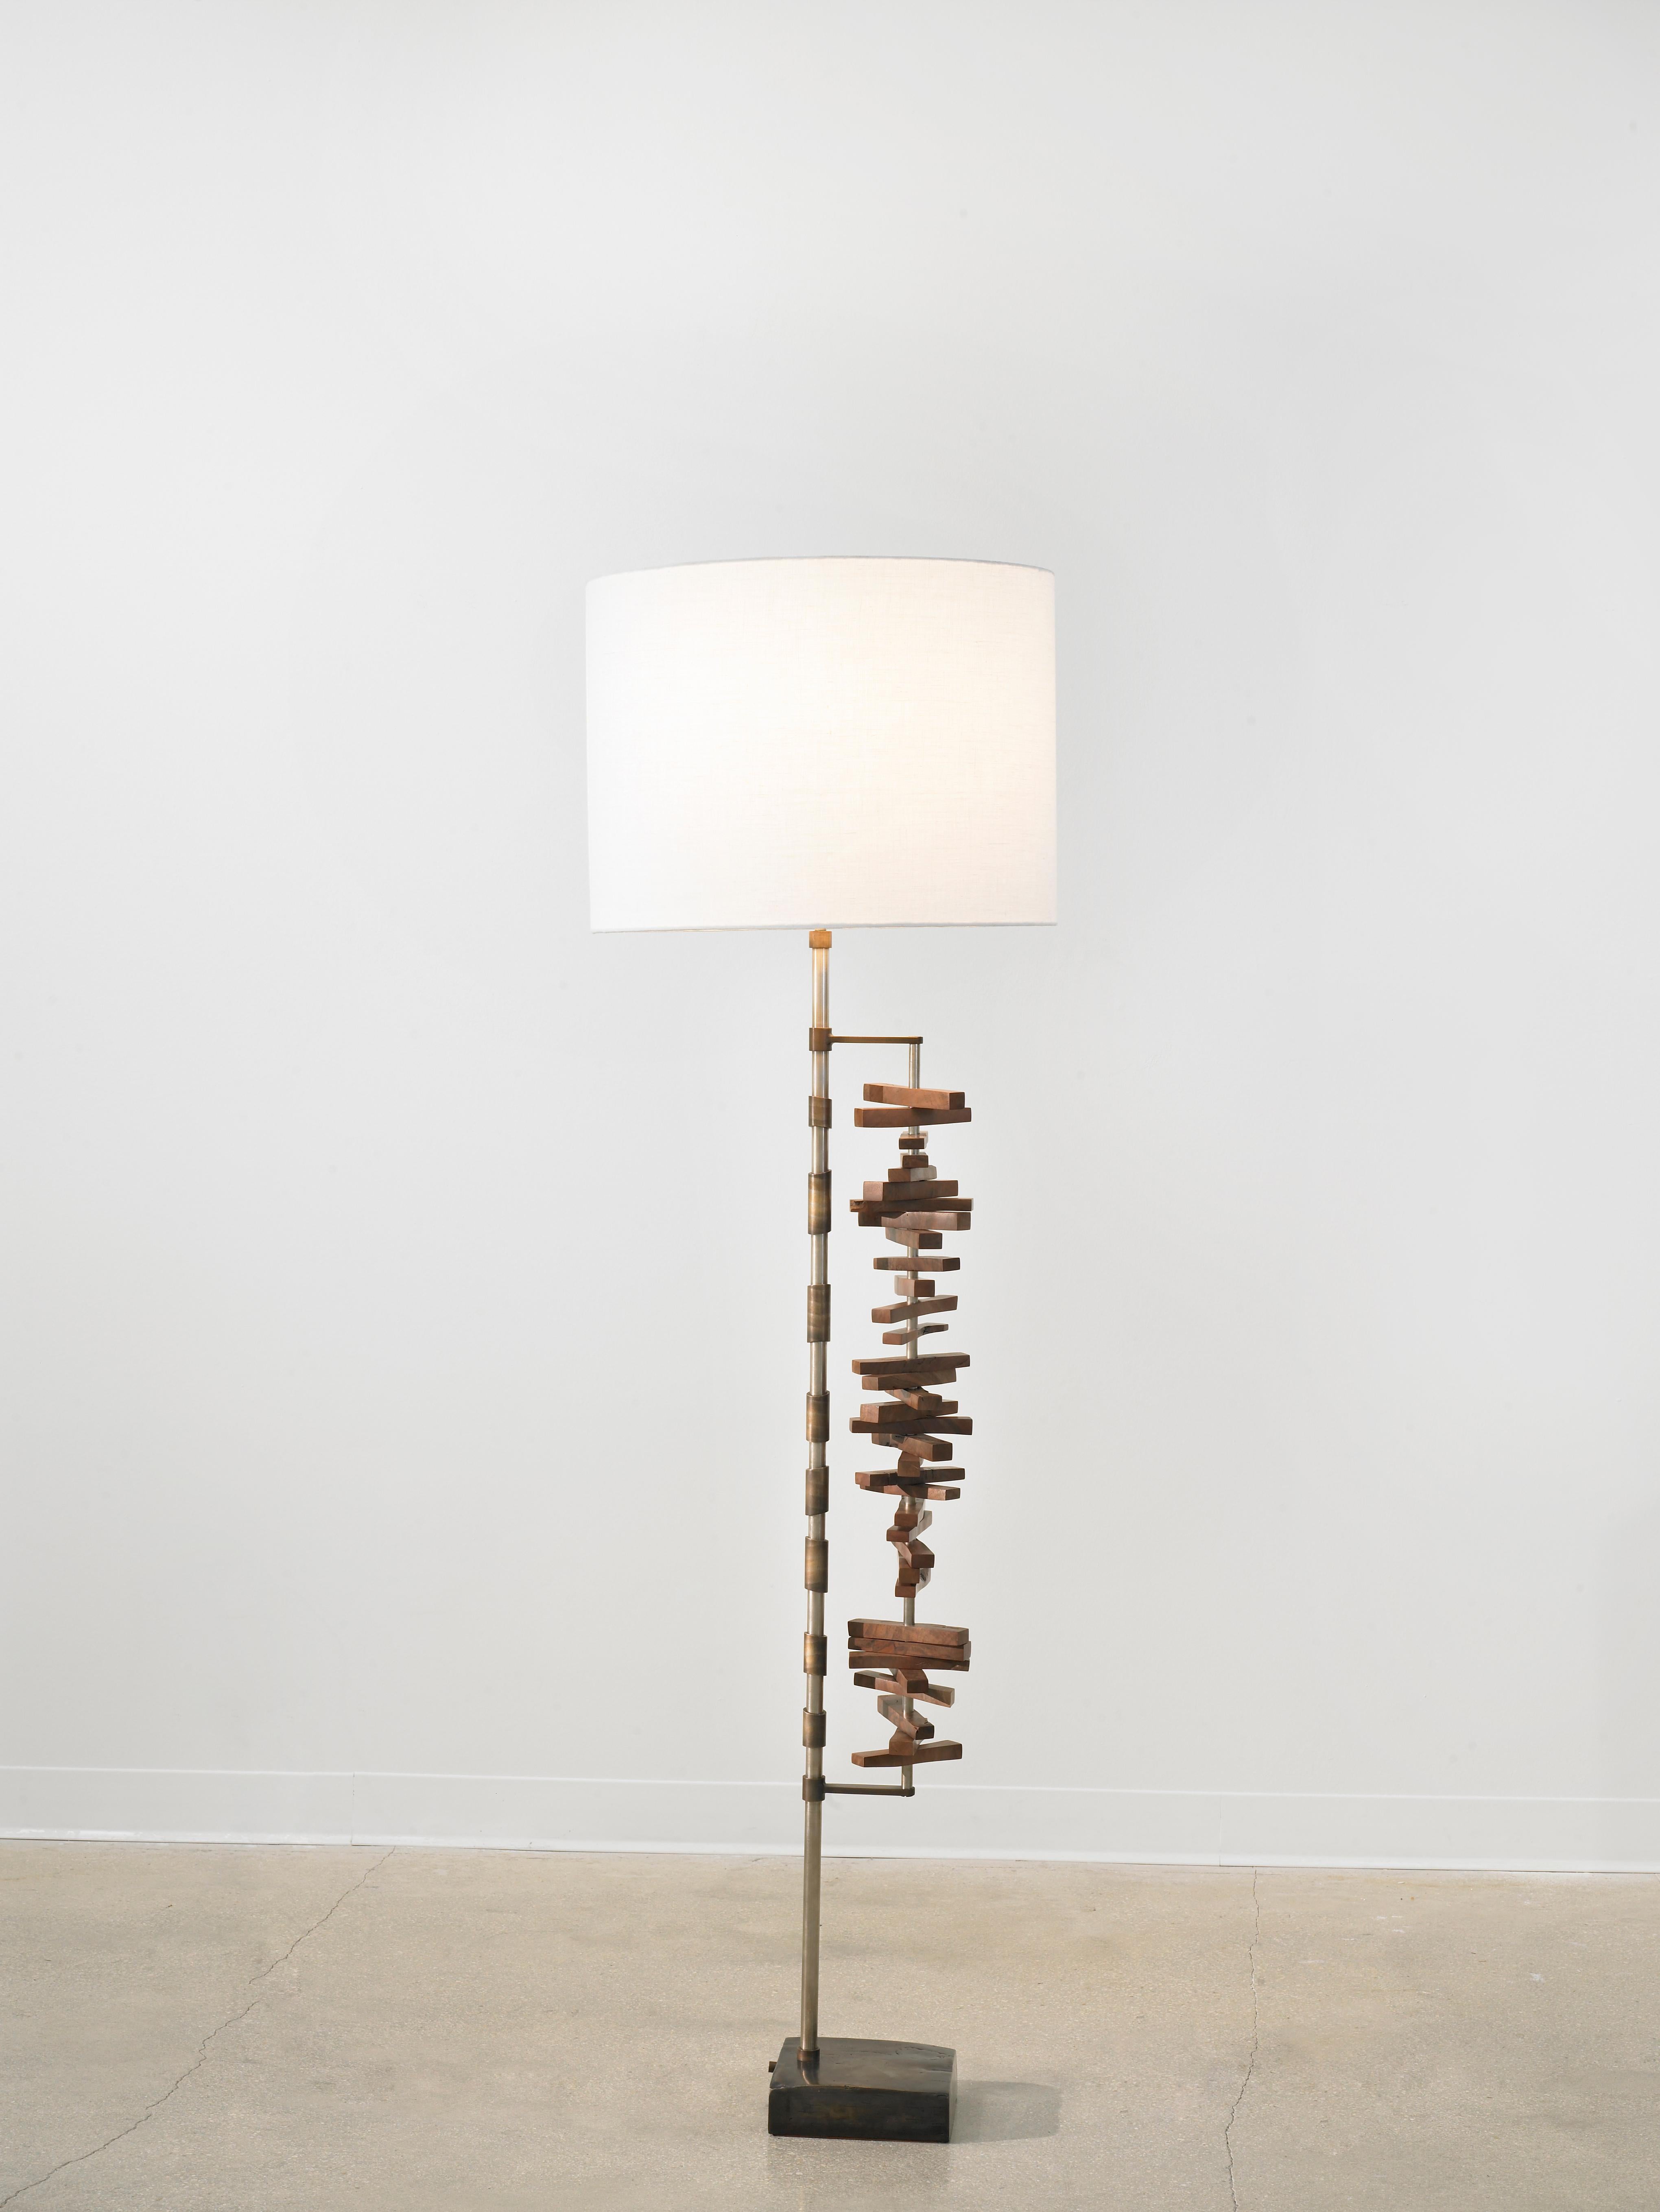 The 'Vela' floor lamp was inspired by tribal wood carvings that embody the balance between repetition and uniqueness. Each lamp is one of a kind due to the individual qualities of the walnut pieces used. No two are alike.